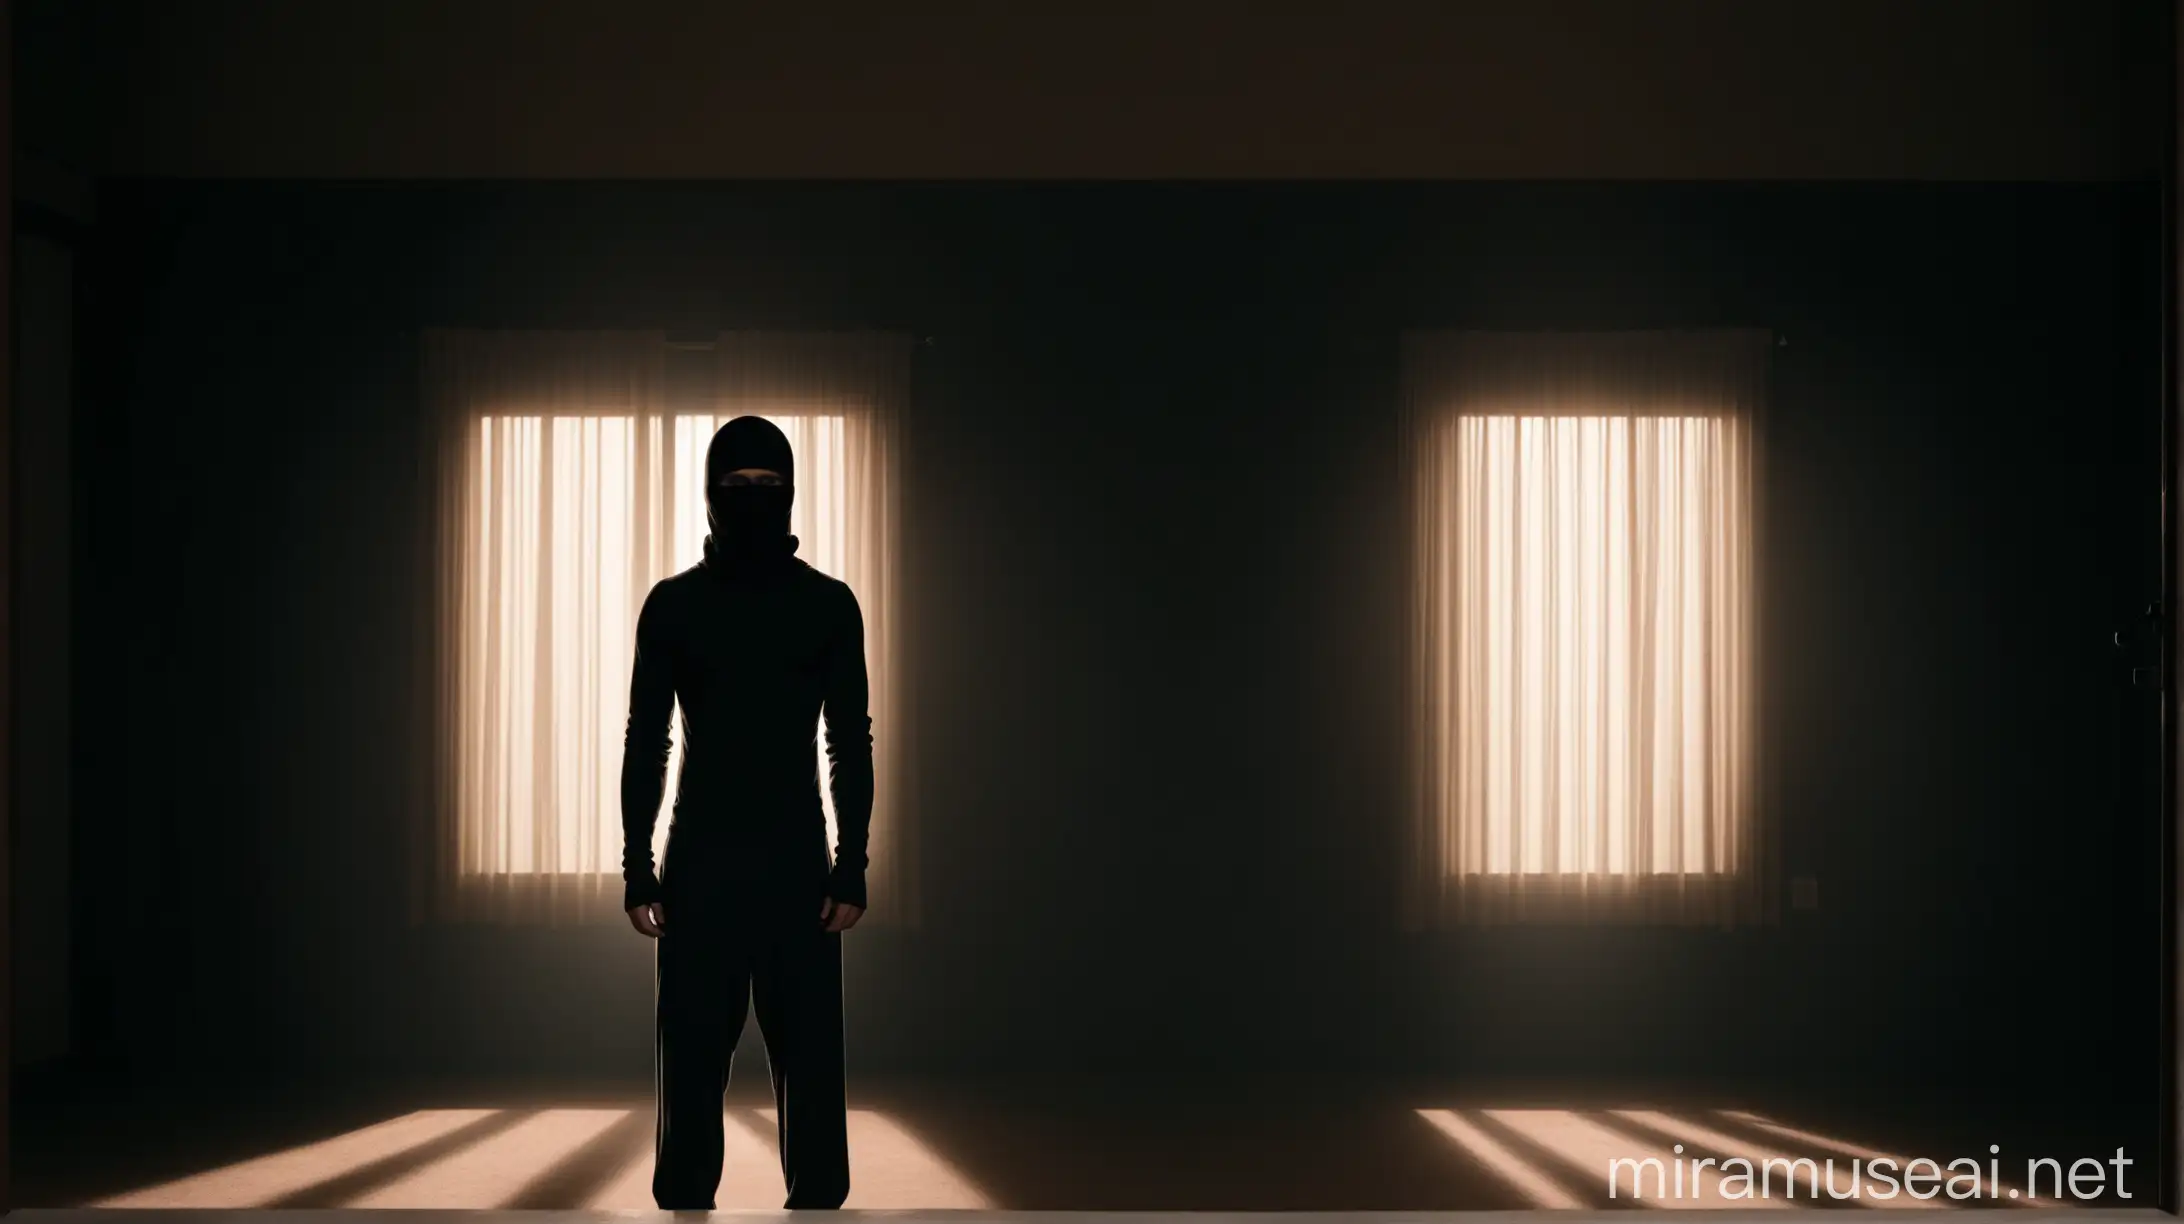 wide shot, The room is dimly lit, with soft light filtering in through the curtains, full frontal view, a shirtless man in a balaclava stands in an empty room